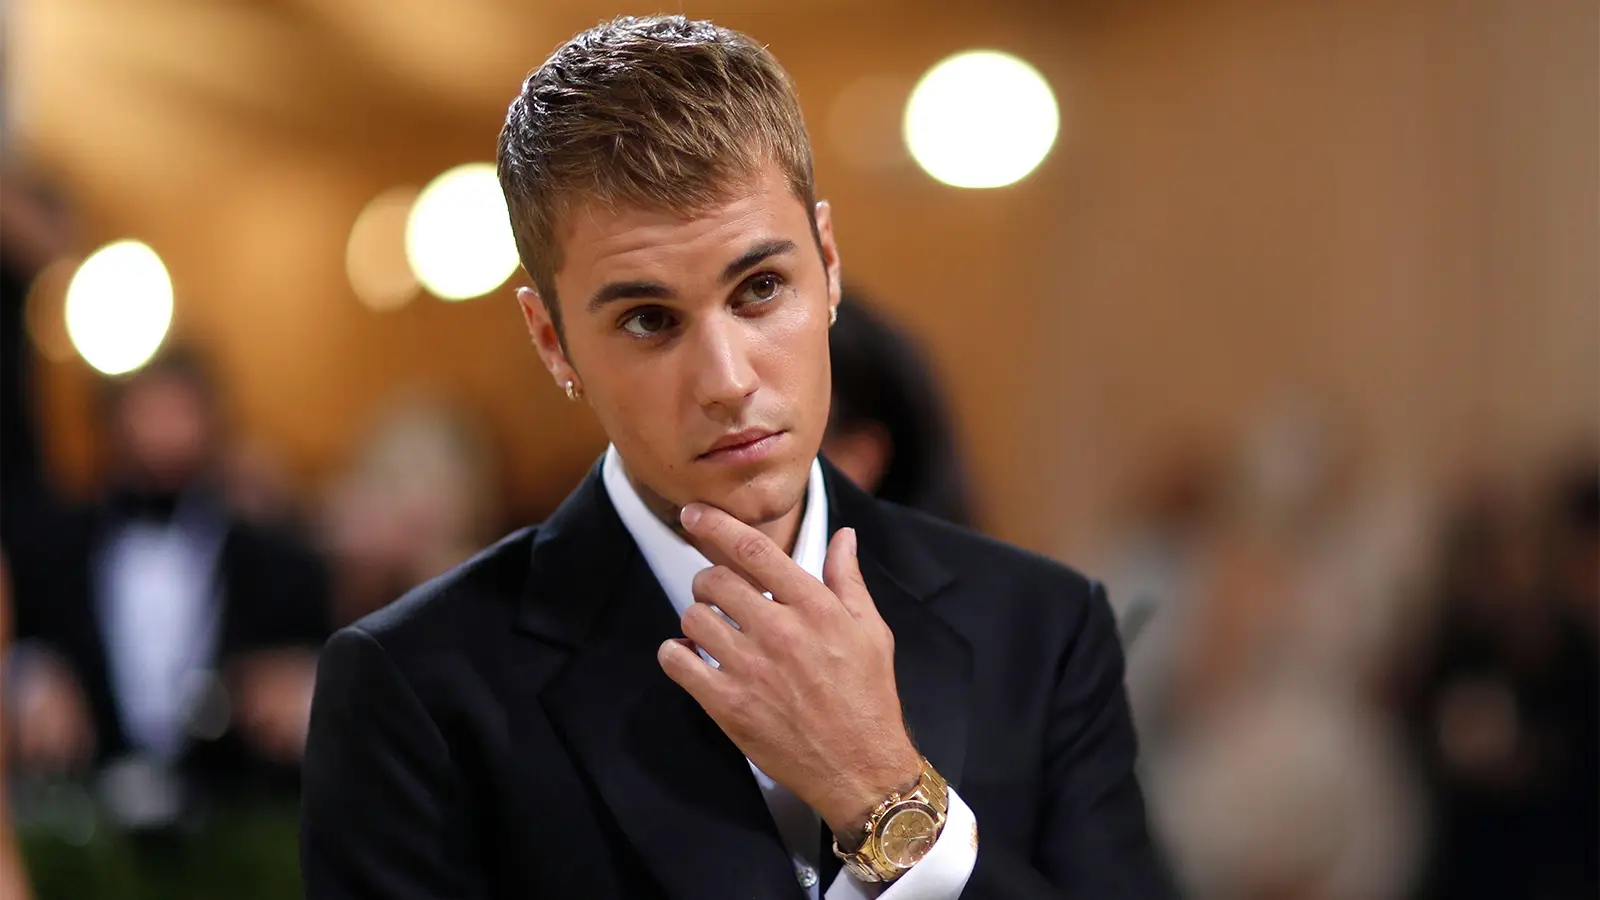 Despite being diagnosed with a rare neurological condition, Justin Bieber appears healthy.